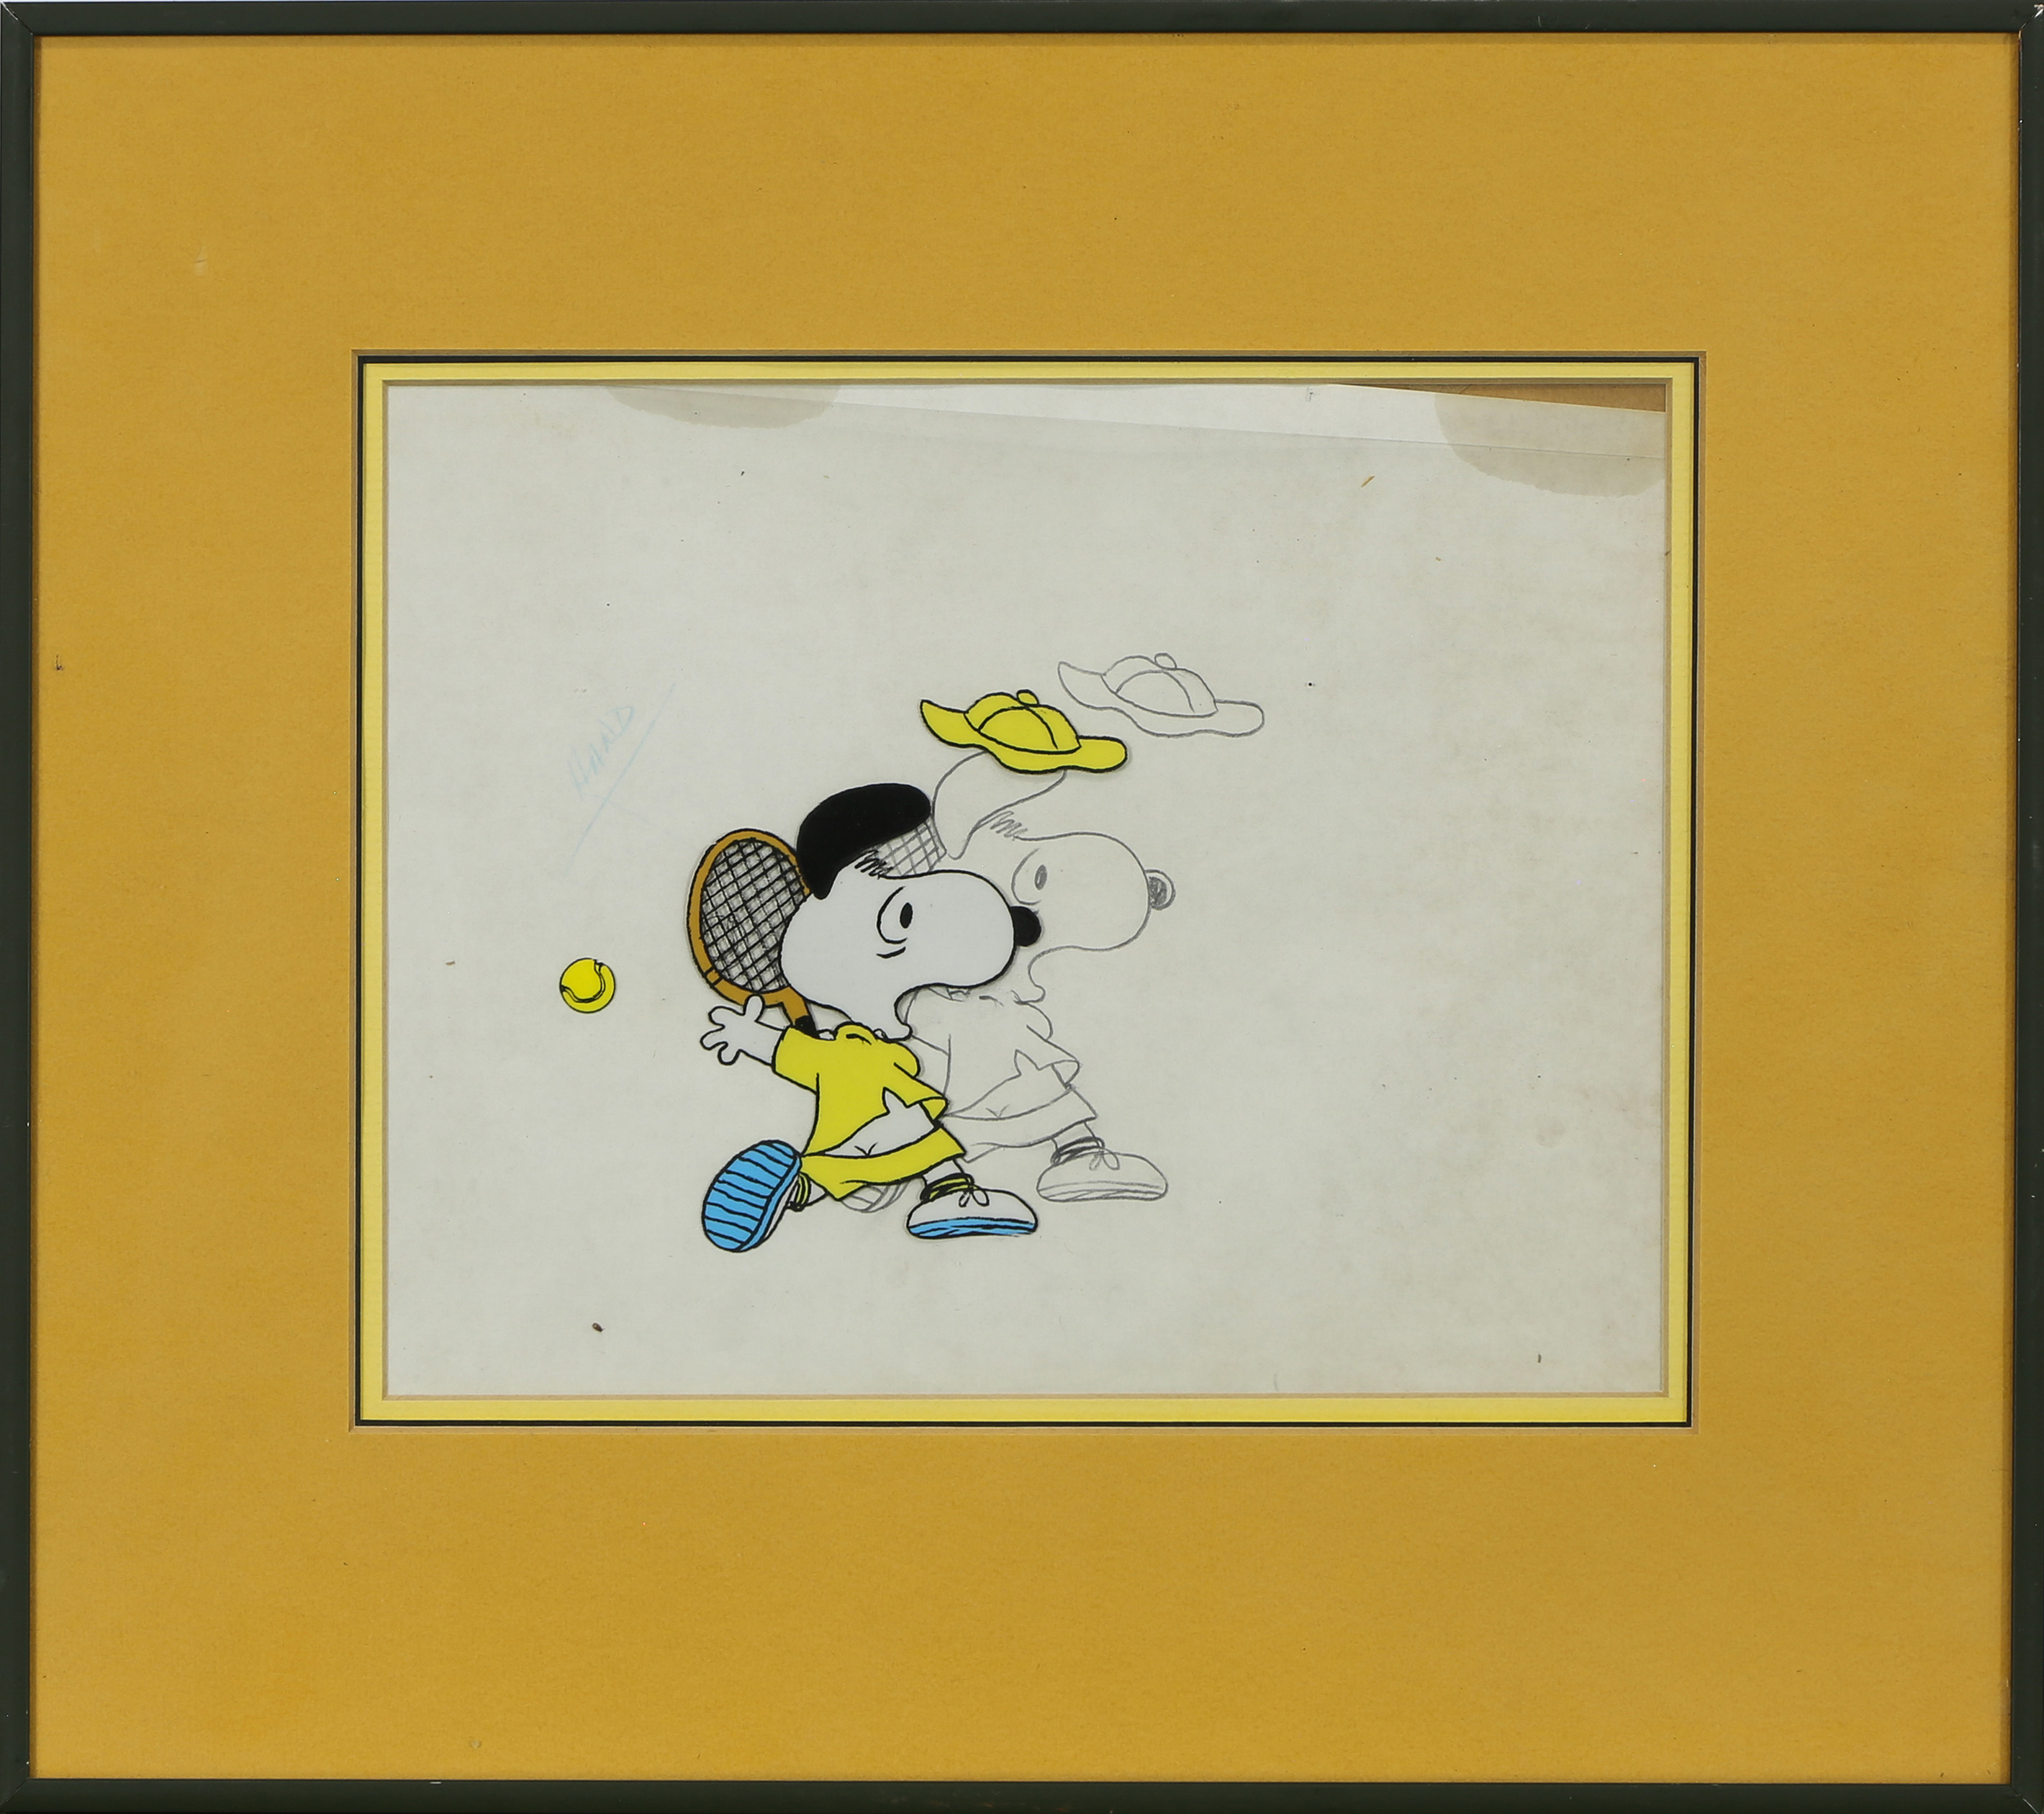 ANIMATION CEL, AFTER CHARLES SCHULZ